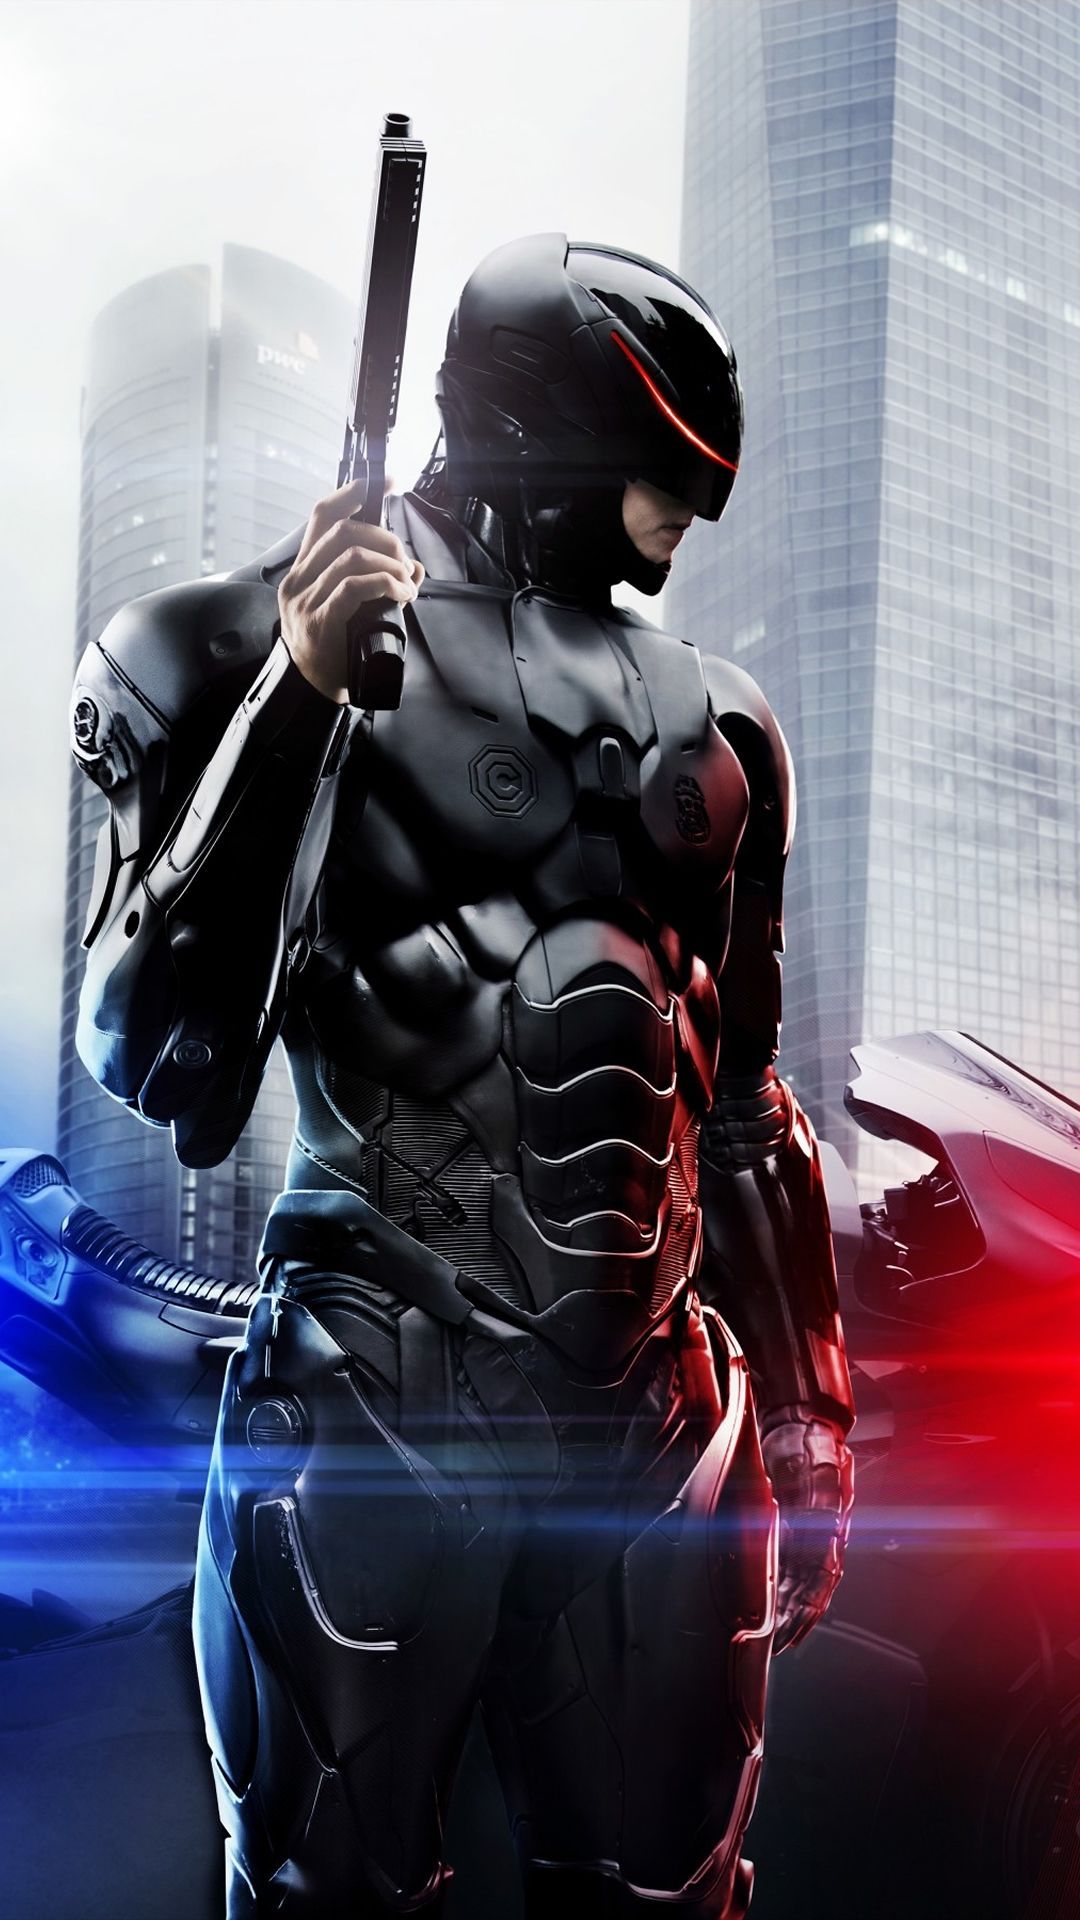 Free download the Robocop 2014 Poster wallpaper , beaty your iphone